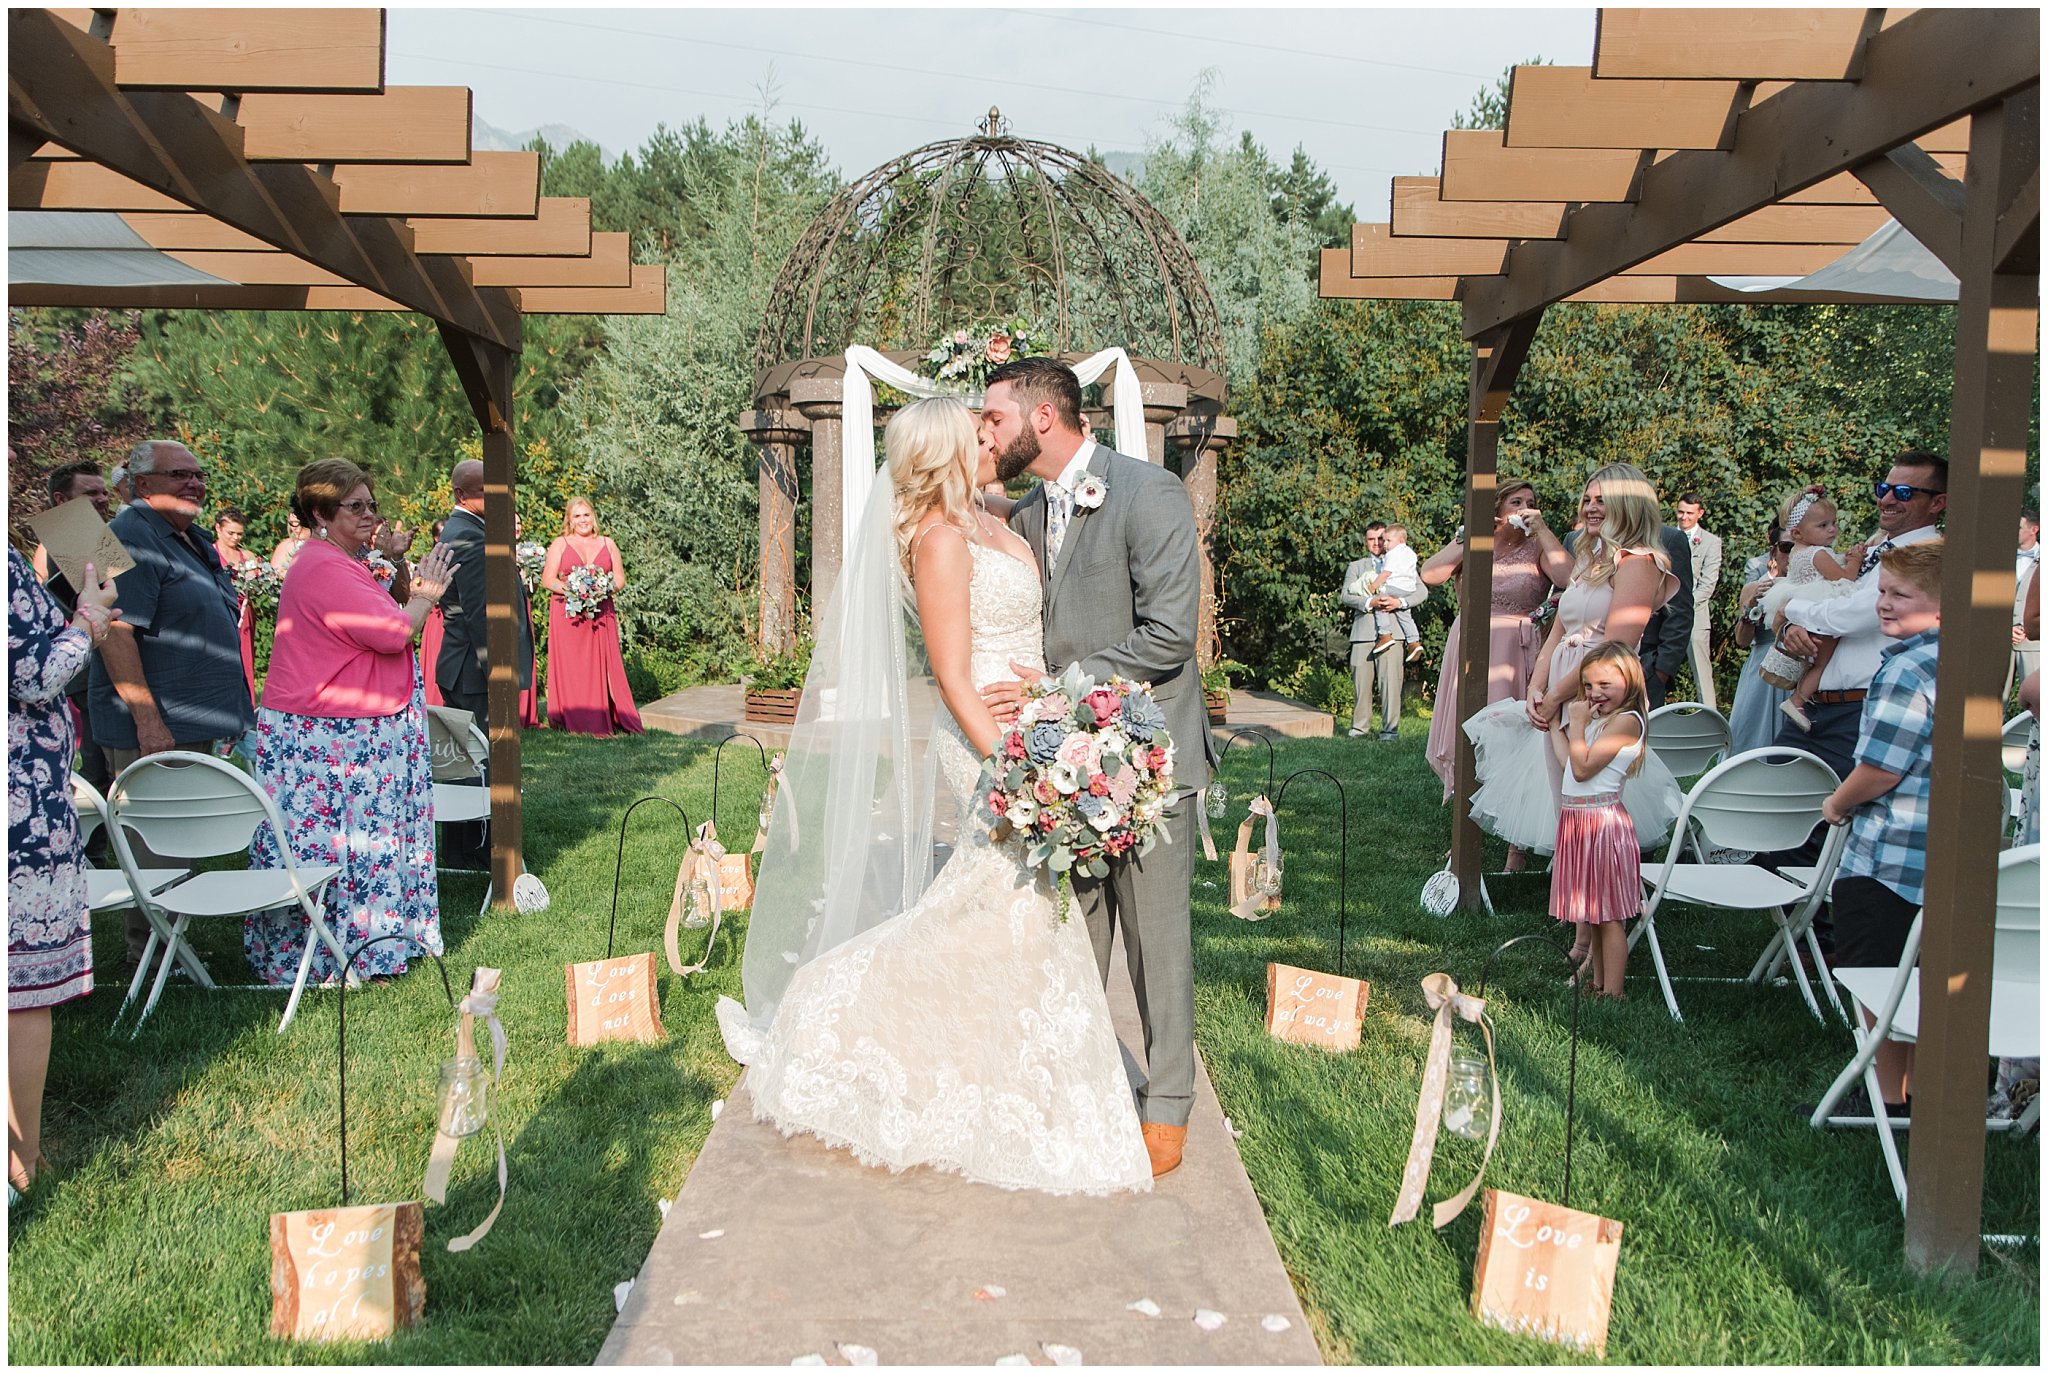 First kiss during wedding ceremony | Dusty Blue and Rose Summer Wedding at Oak Hills Utah | Jessie and Dallin Photography